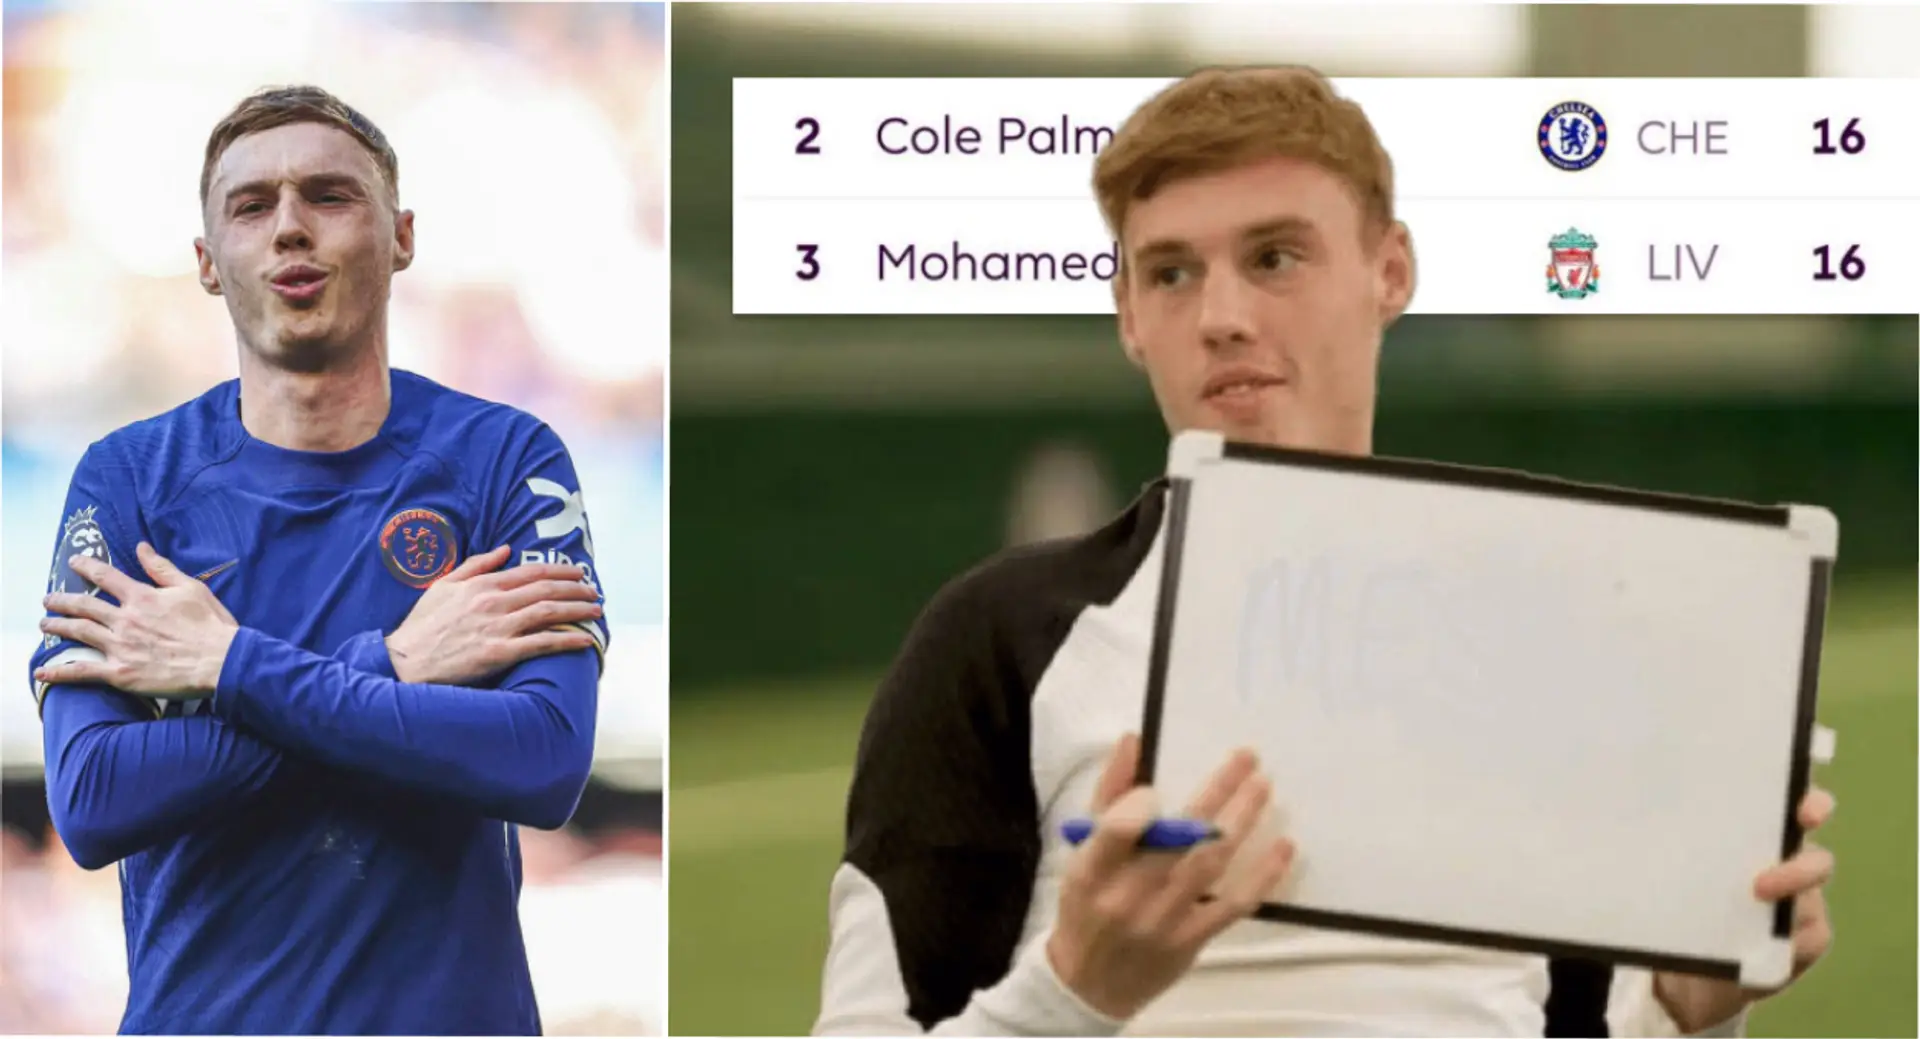 'You're welcome in': Cole Palmer trending among Barca fans — partly for his choice of GOAT